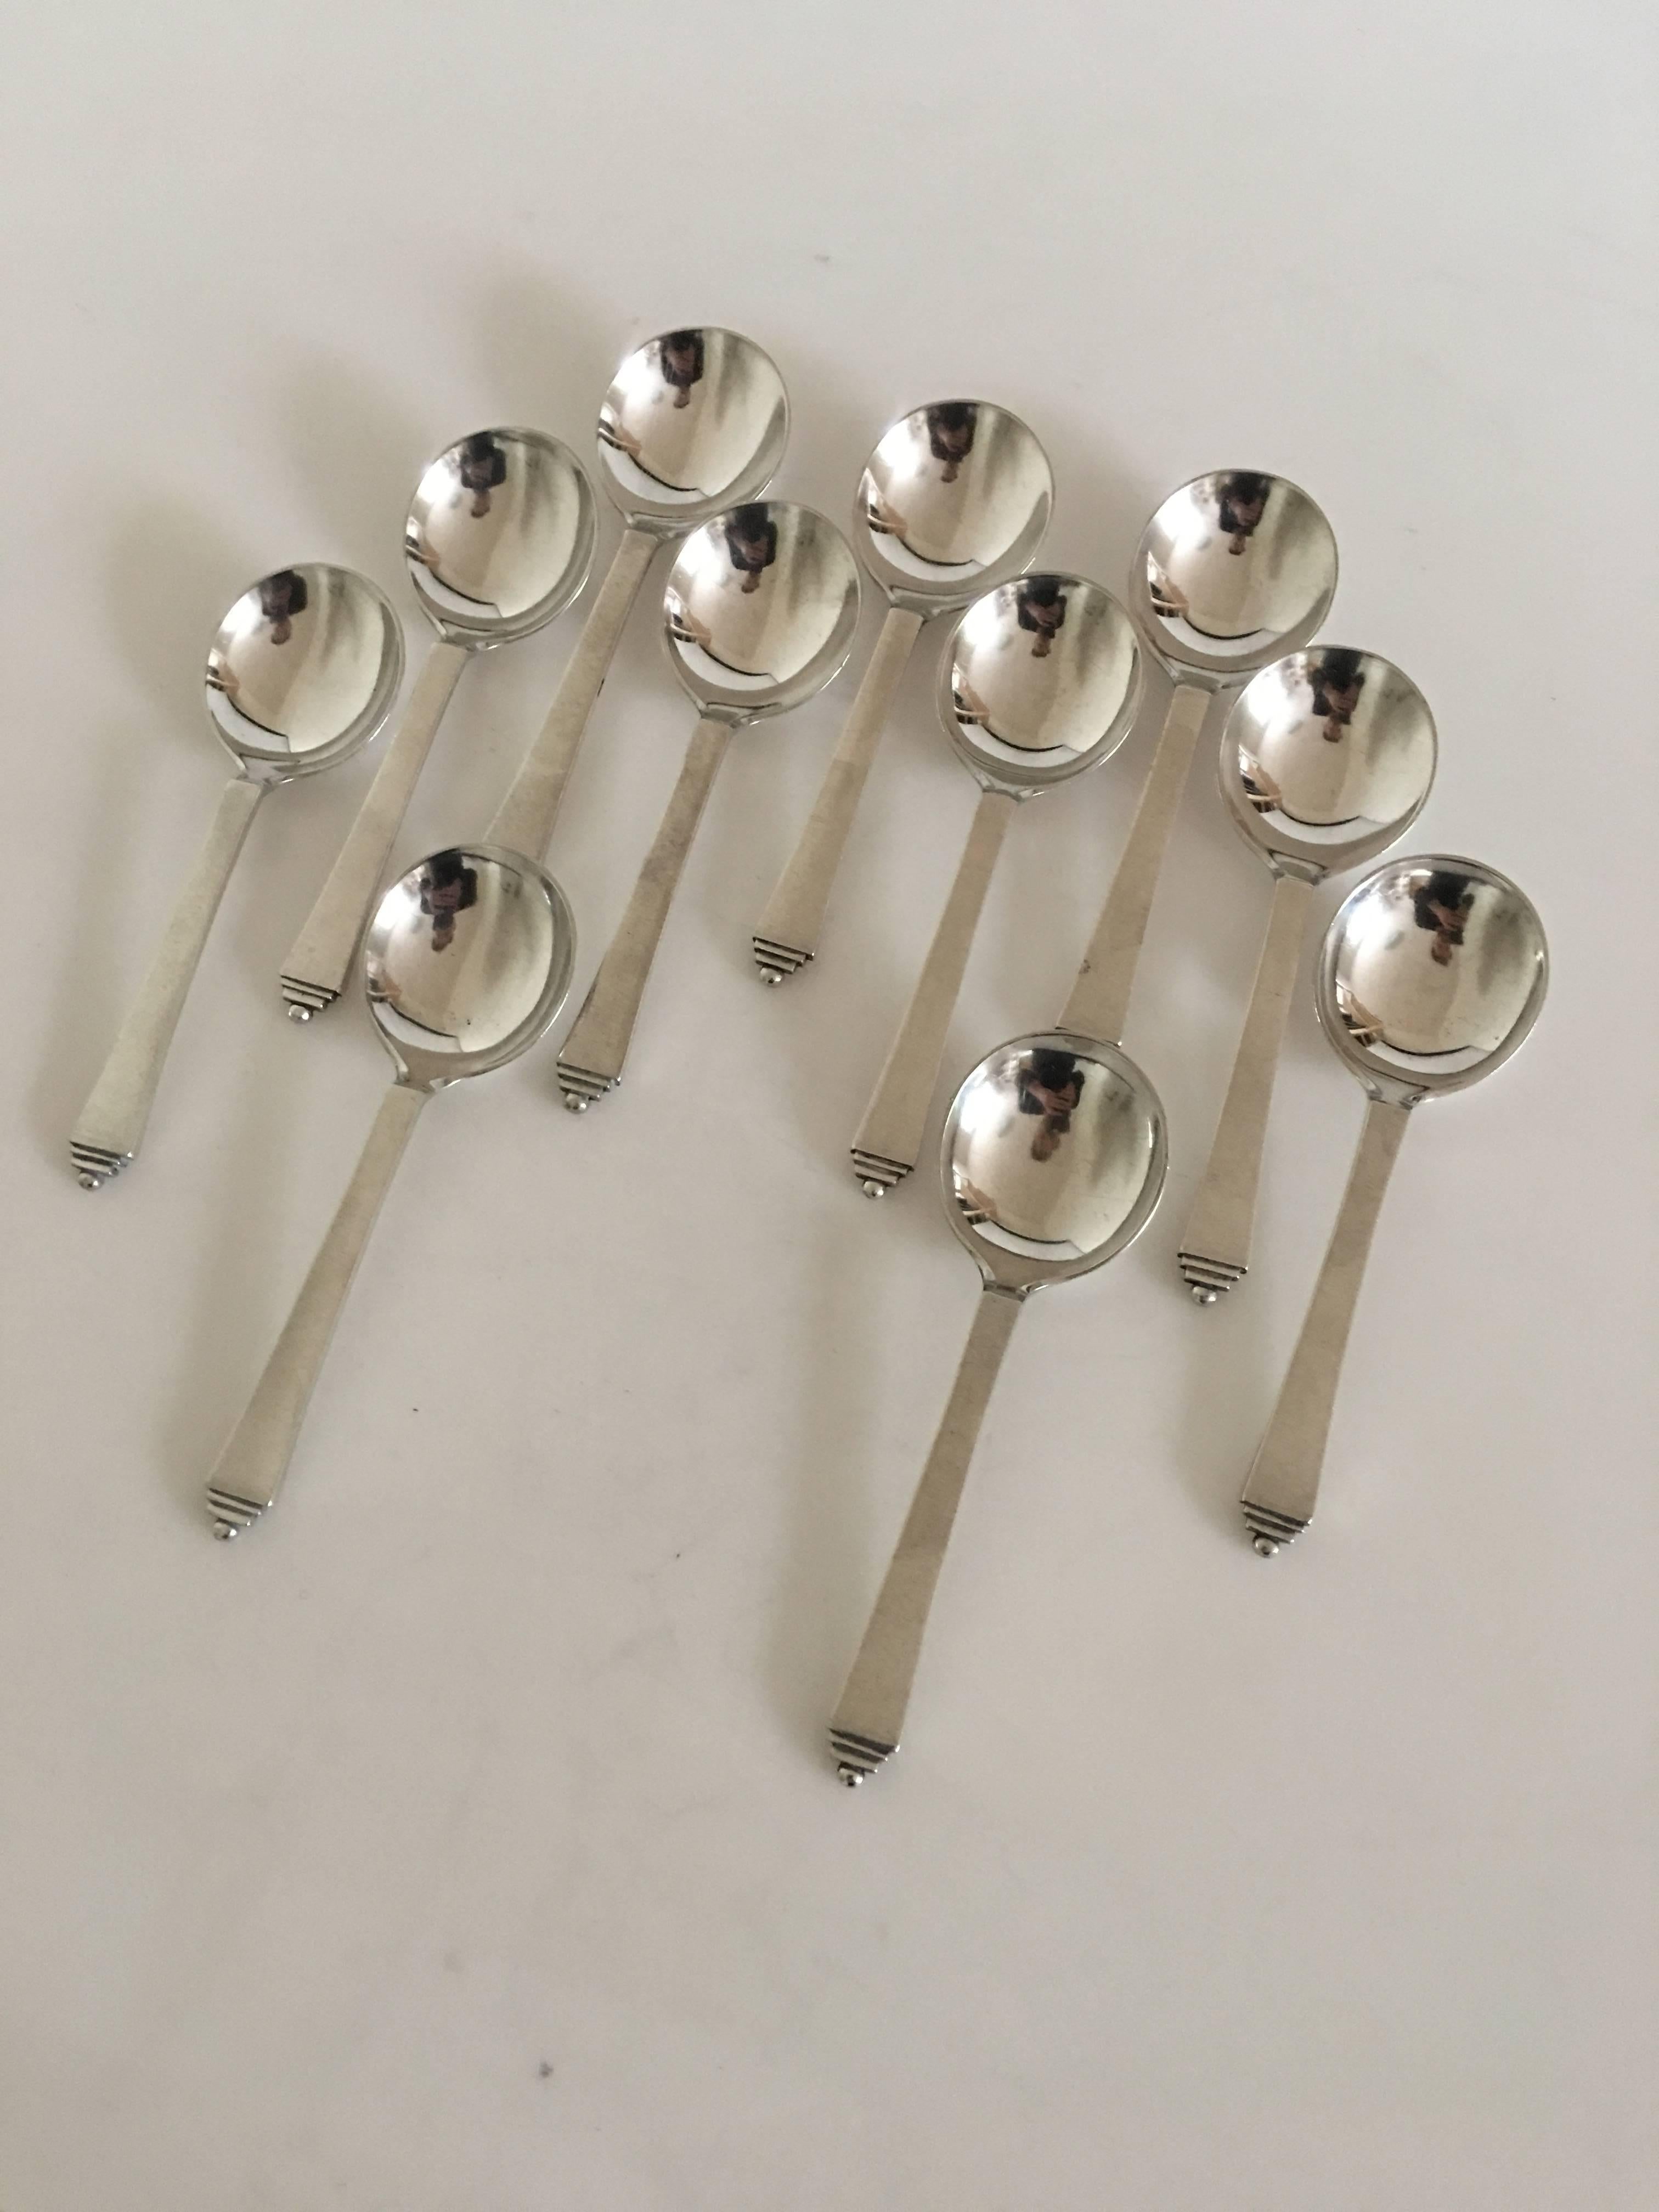 Georg Jensen sterling silver Pyramid set of 11 Bouillon spoons with early GJ silver hallmarks from 1920s. Measures 13 cm L (5 1/8